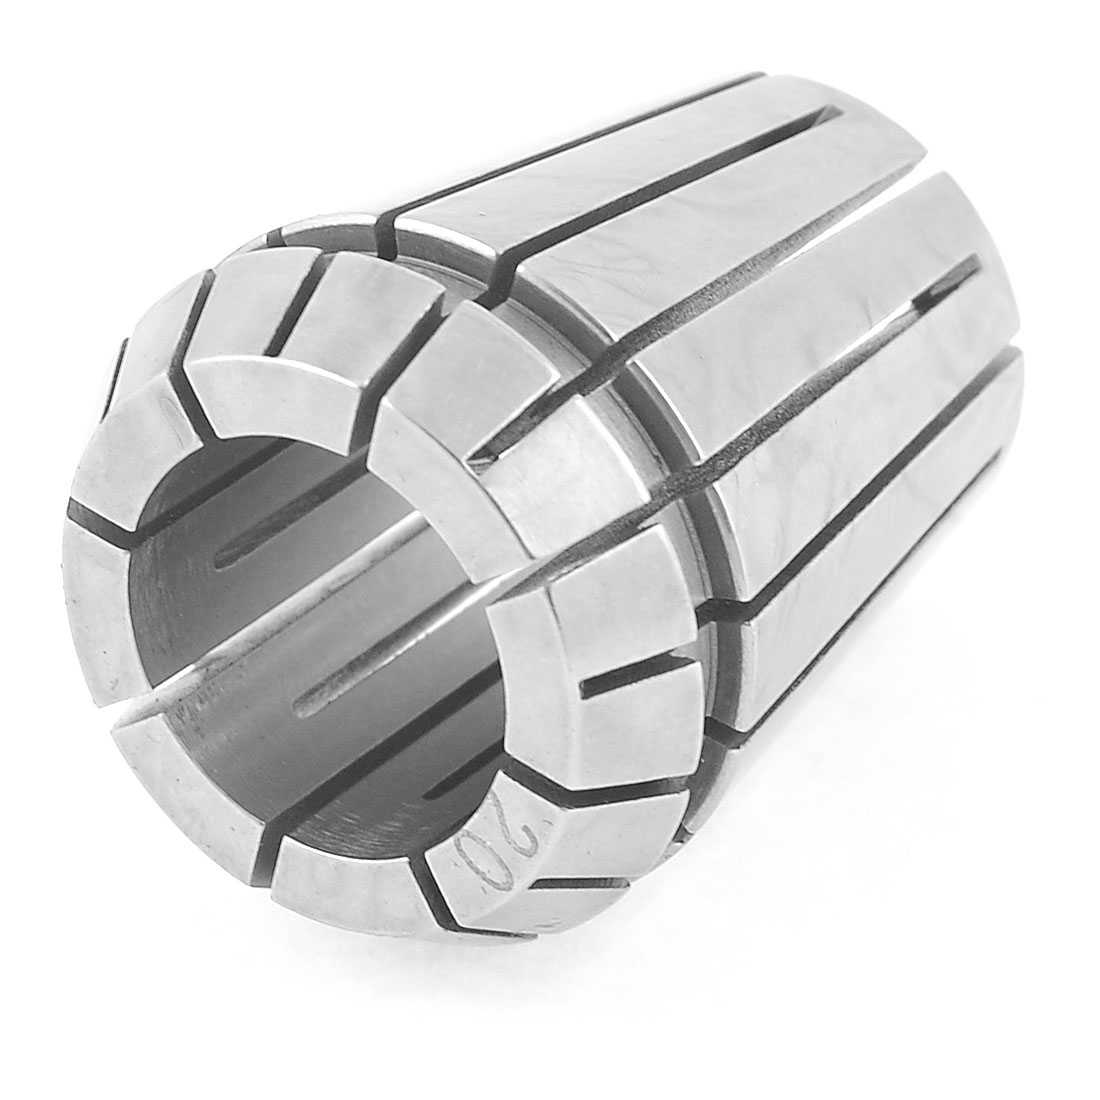 Unique Bargains ER32-20 Silver Tone Clamping 20mm 0.78' Dia Spring Collet Chuck